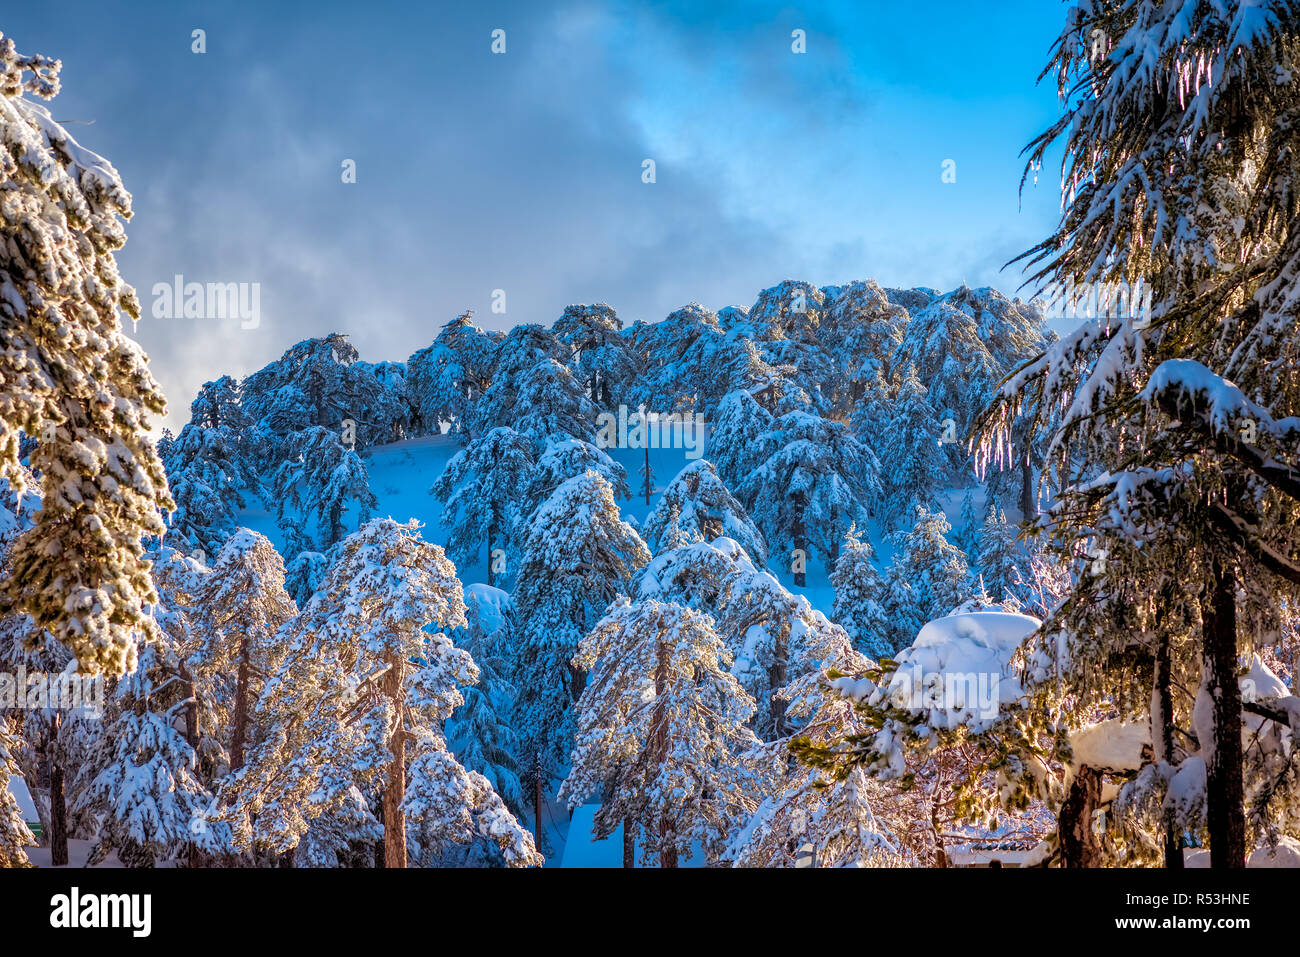 Snow-covered pine forest at Troodos mountains, Cyprus. Stock Photo